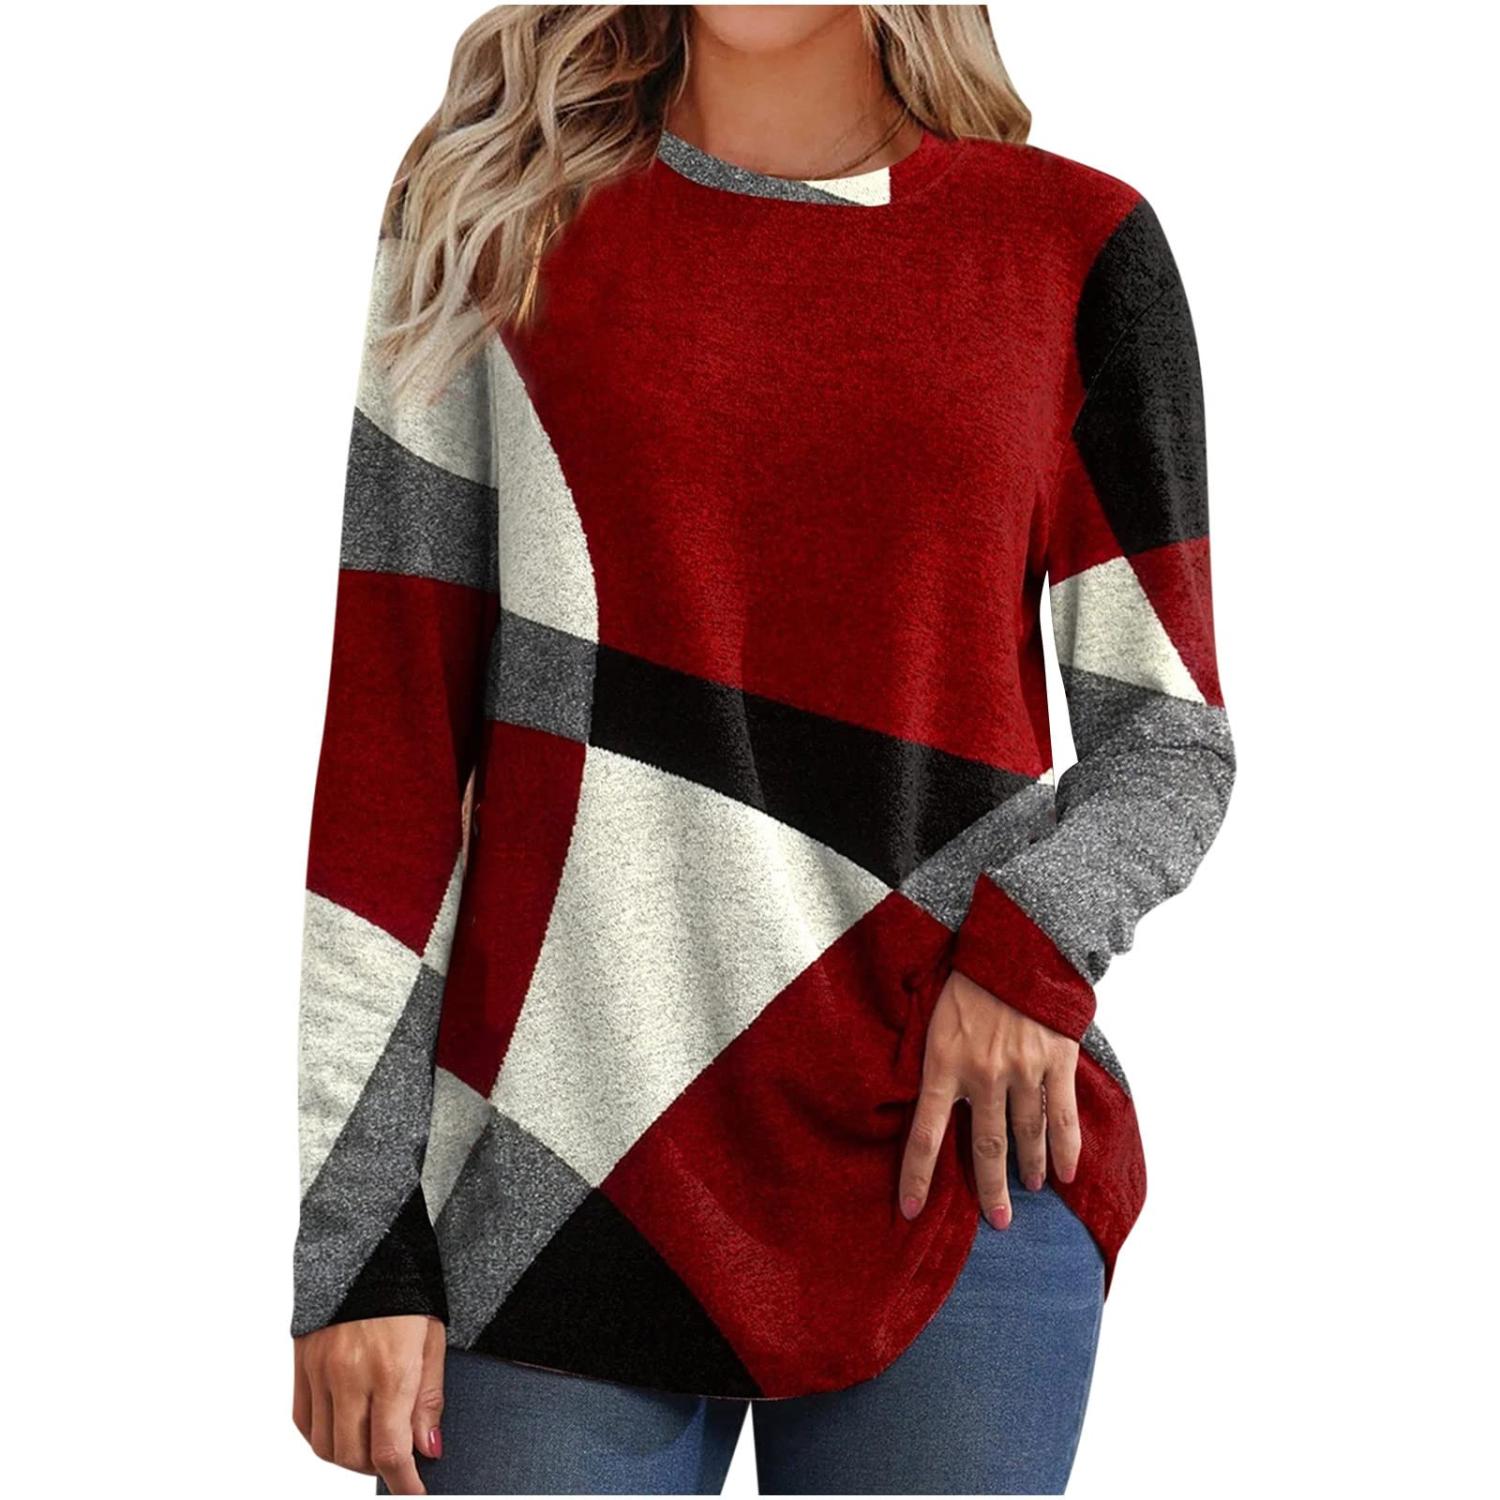 Western Tops for Ladies Plus Size Tops Womens Fall Fashion Long Sleeve T  Shirts Loose Tunic Trendy Floral Printed Sweatshirts Scoop Neck Pullover  Red XL 